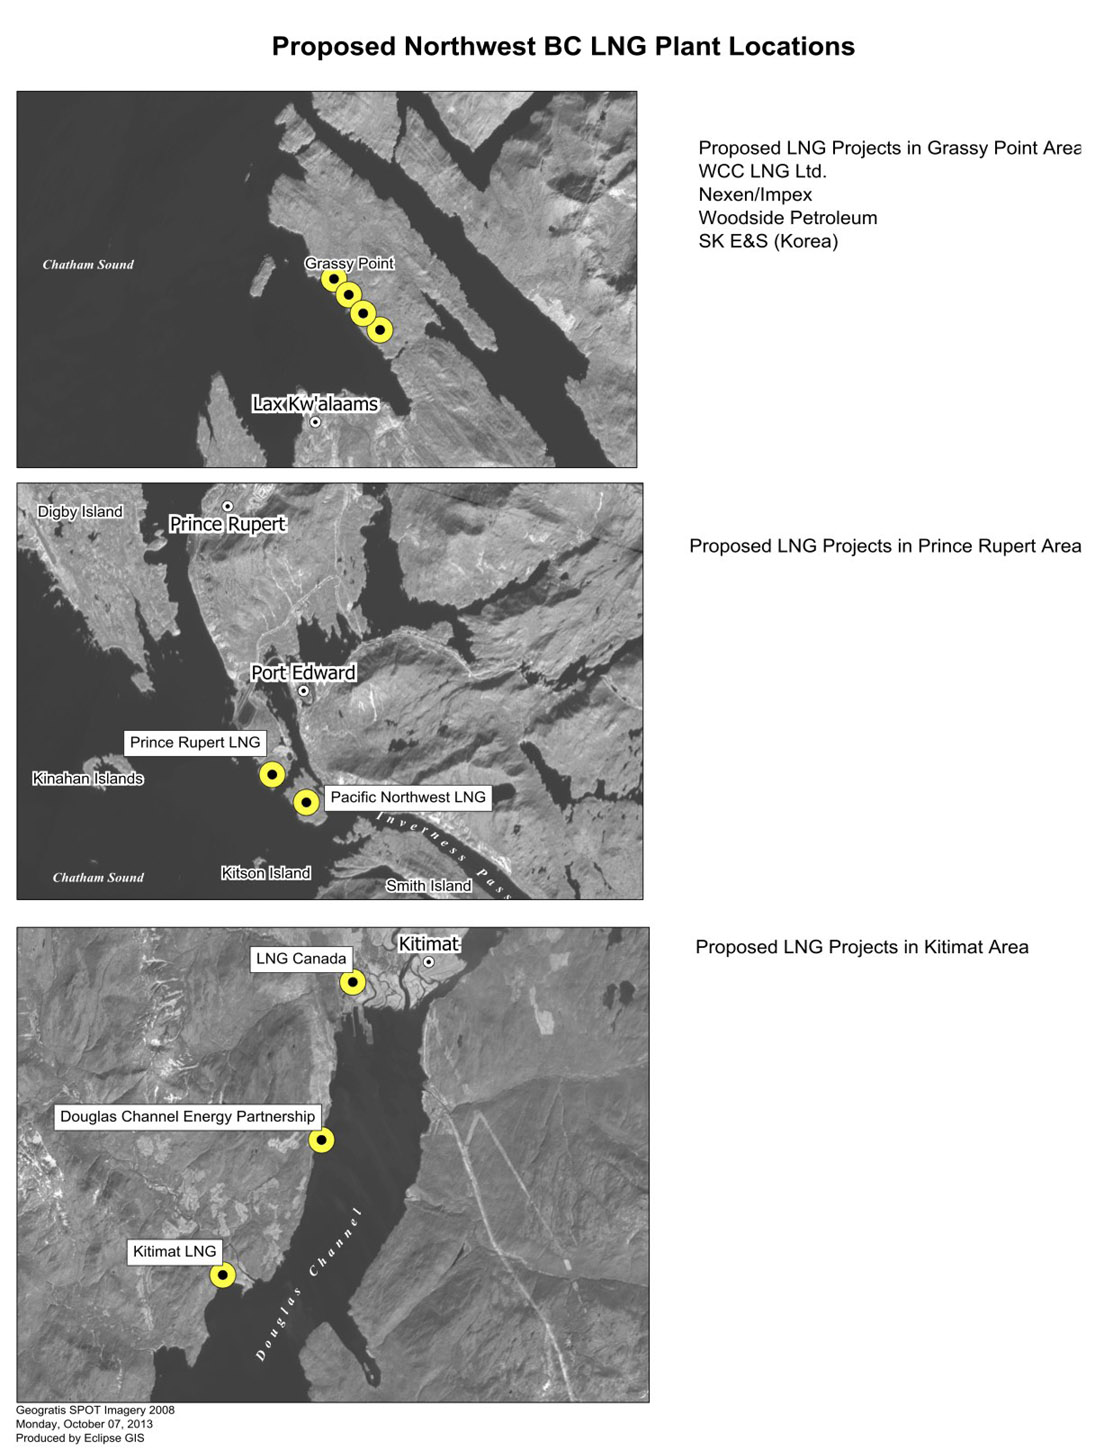 NWBC-Proposed-LNG-Plant-Sites-October-2013